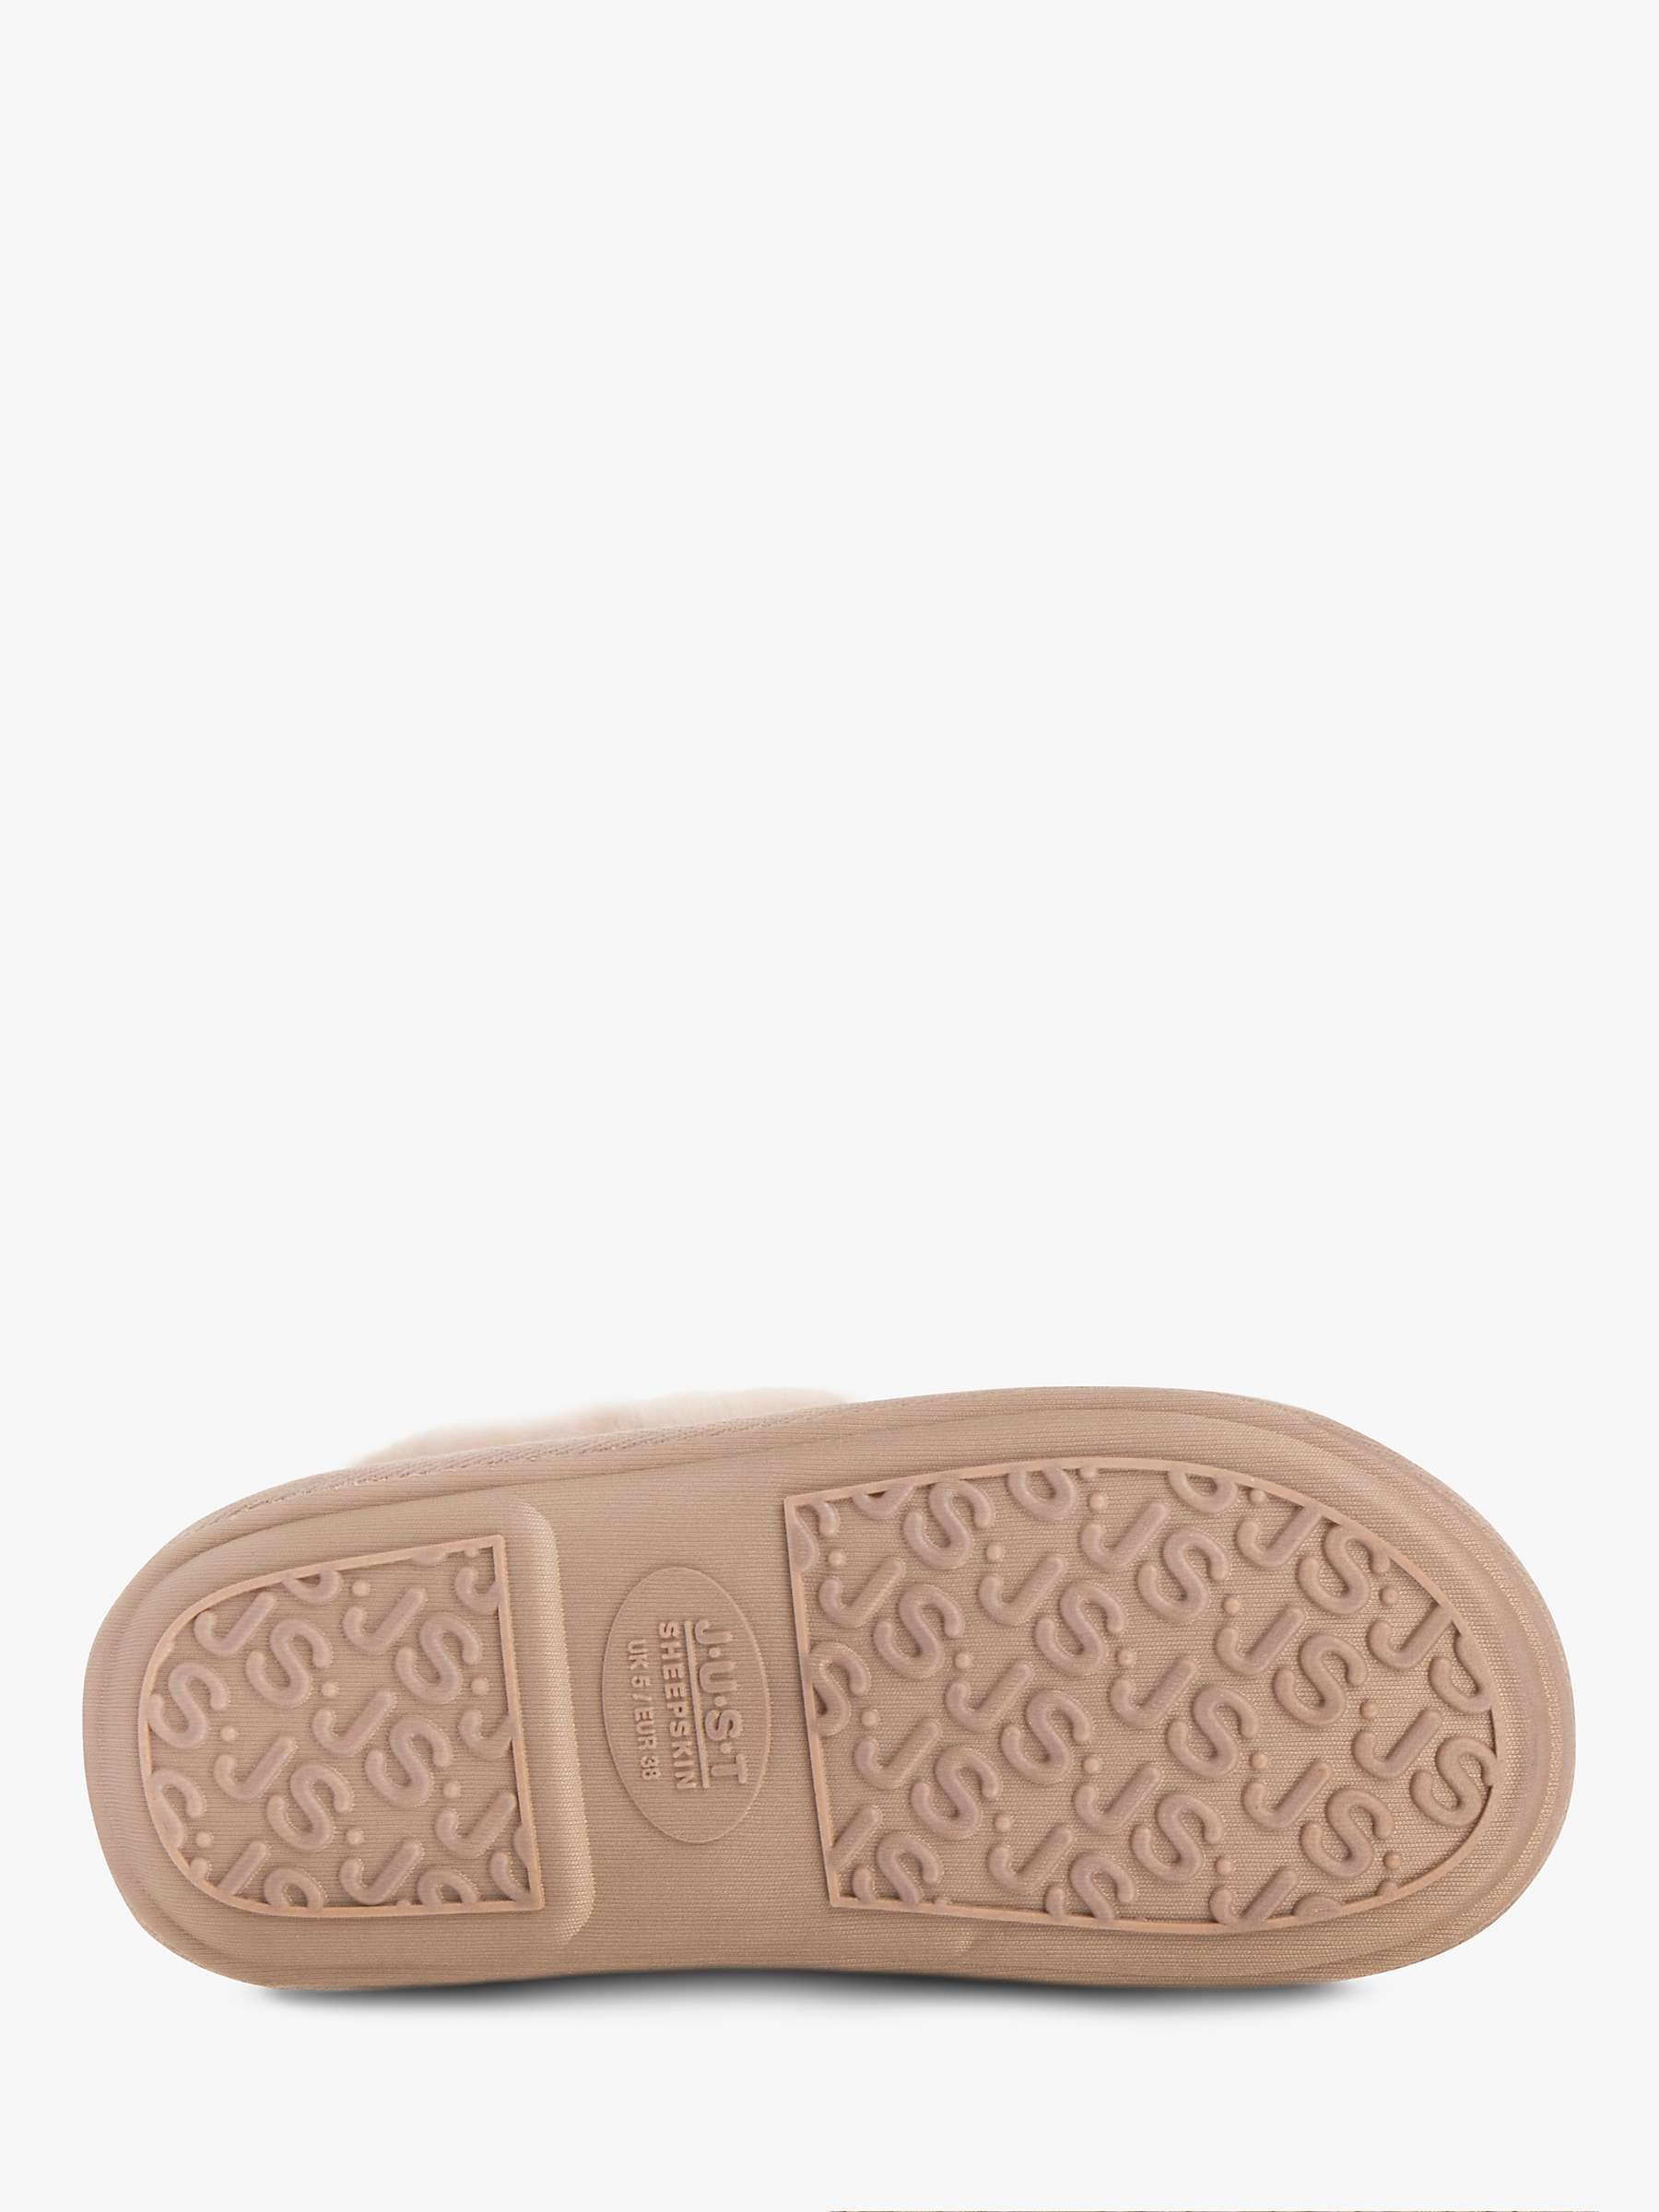 Buy Just Sheepskin Classic Suede Slippers Online at johnlewis.com